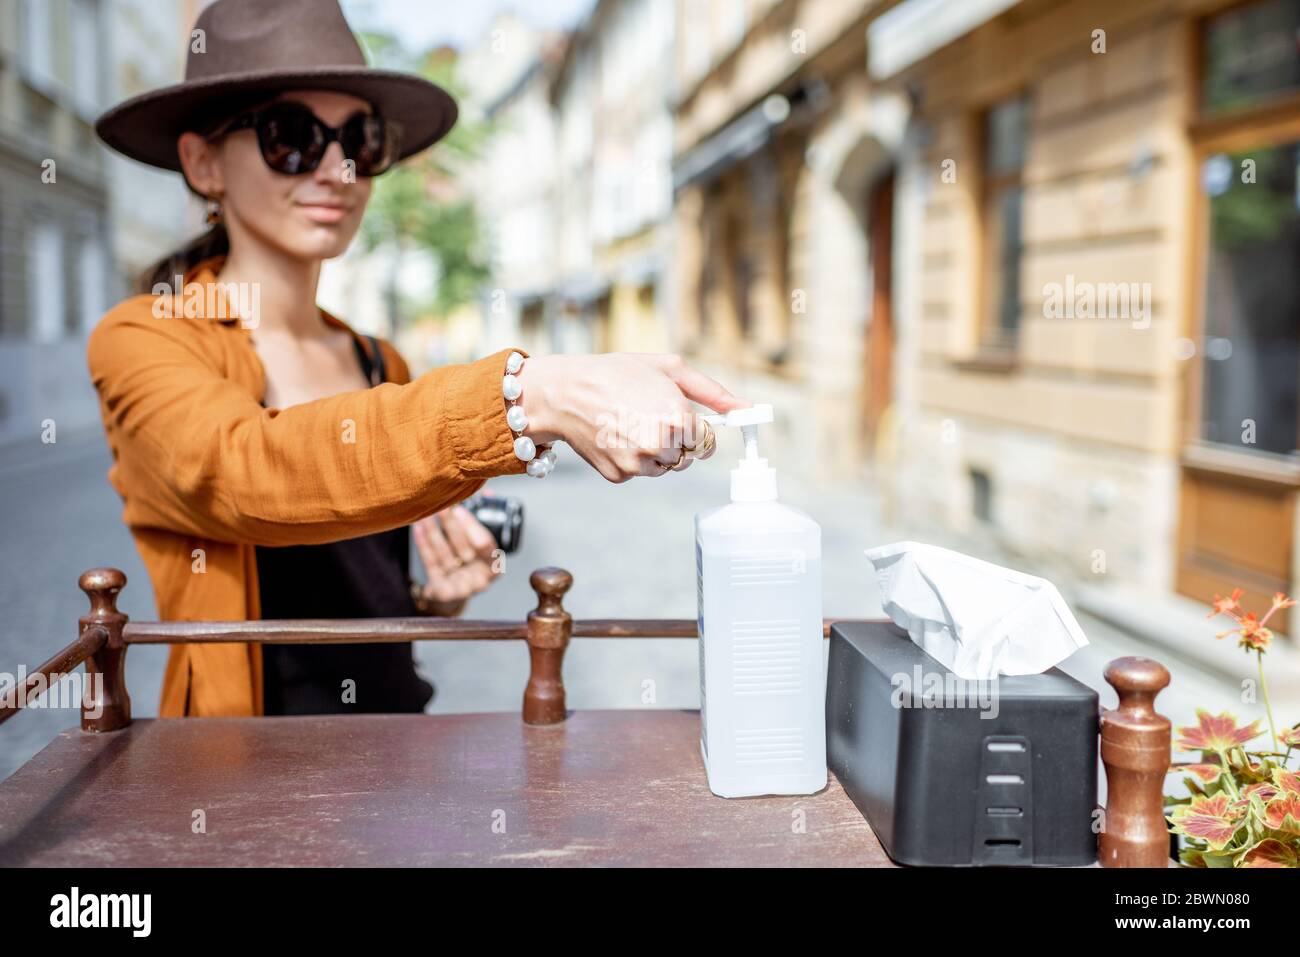 Woman disinfecting her hands, visiting cafe or restaurant outdoors. Concept of a new social rules after the epidemic Stock Photo